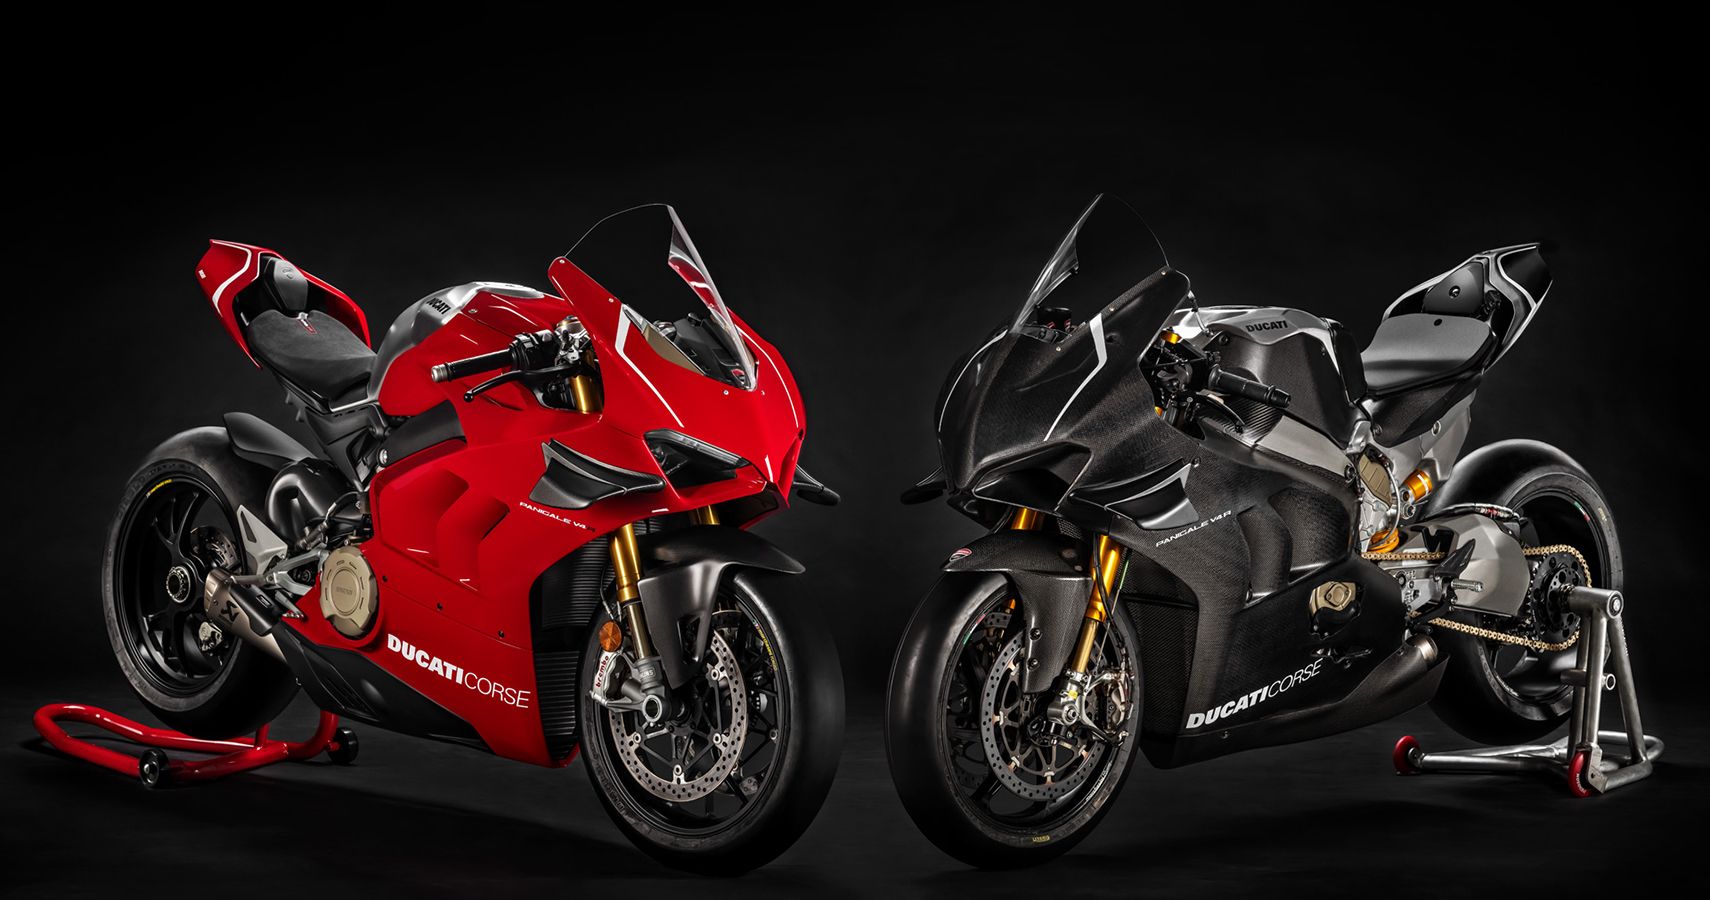 Ducati Panigale V4 R red and black